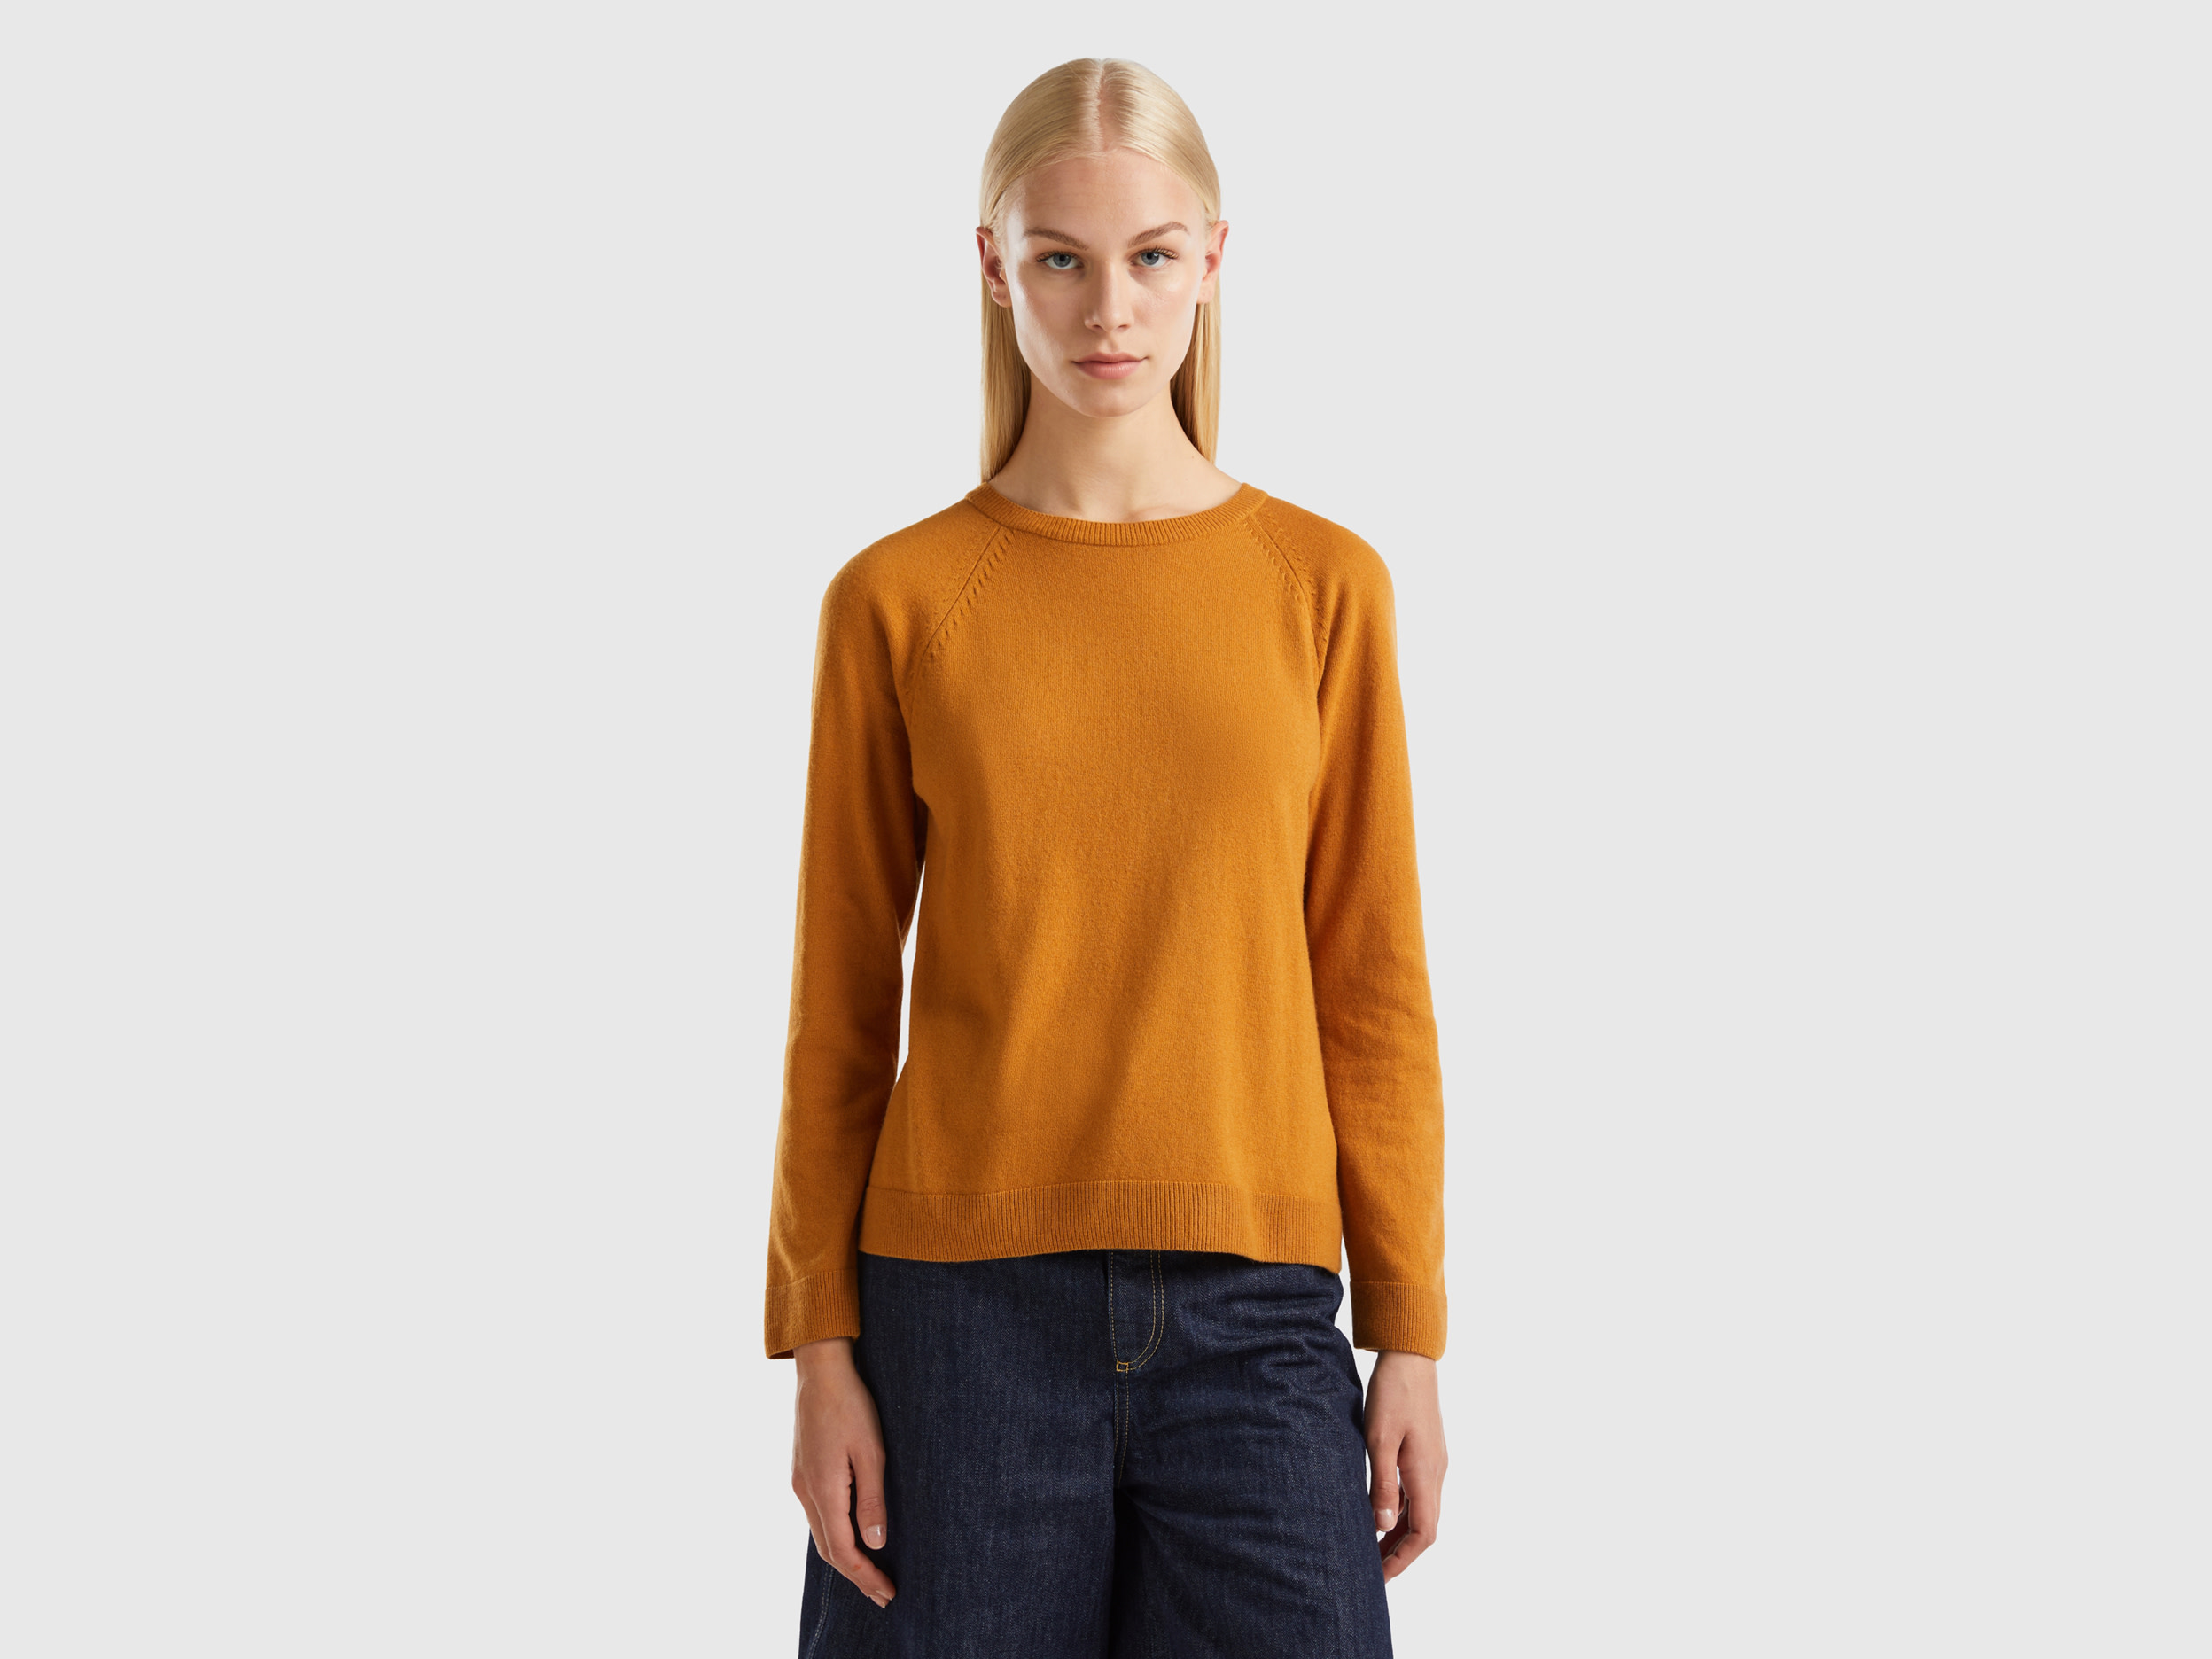 Benetton, Tobacco Crew Neck Sweater In Cashmere And Wool Blend, size S, , Women